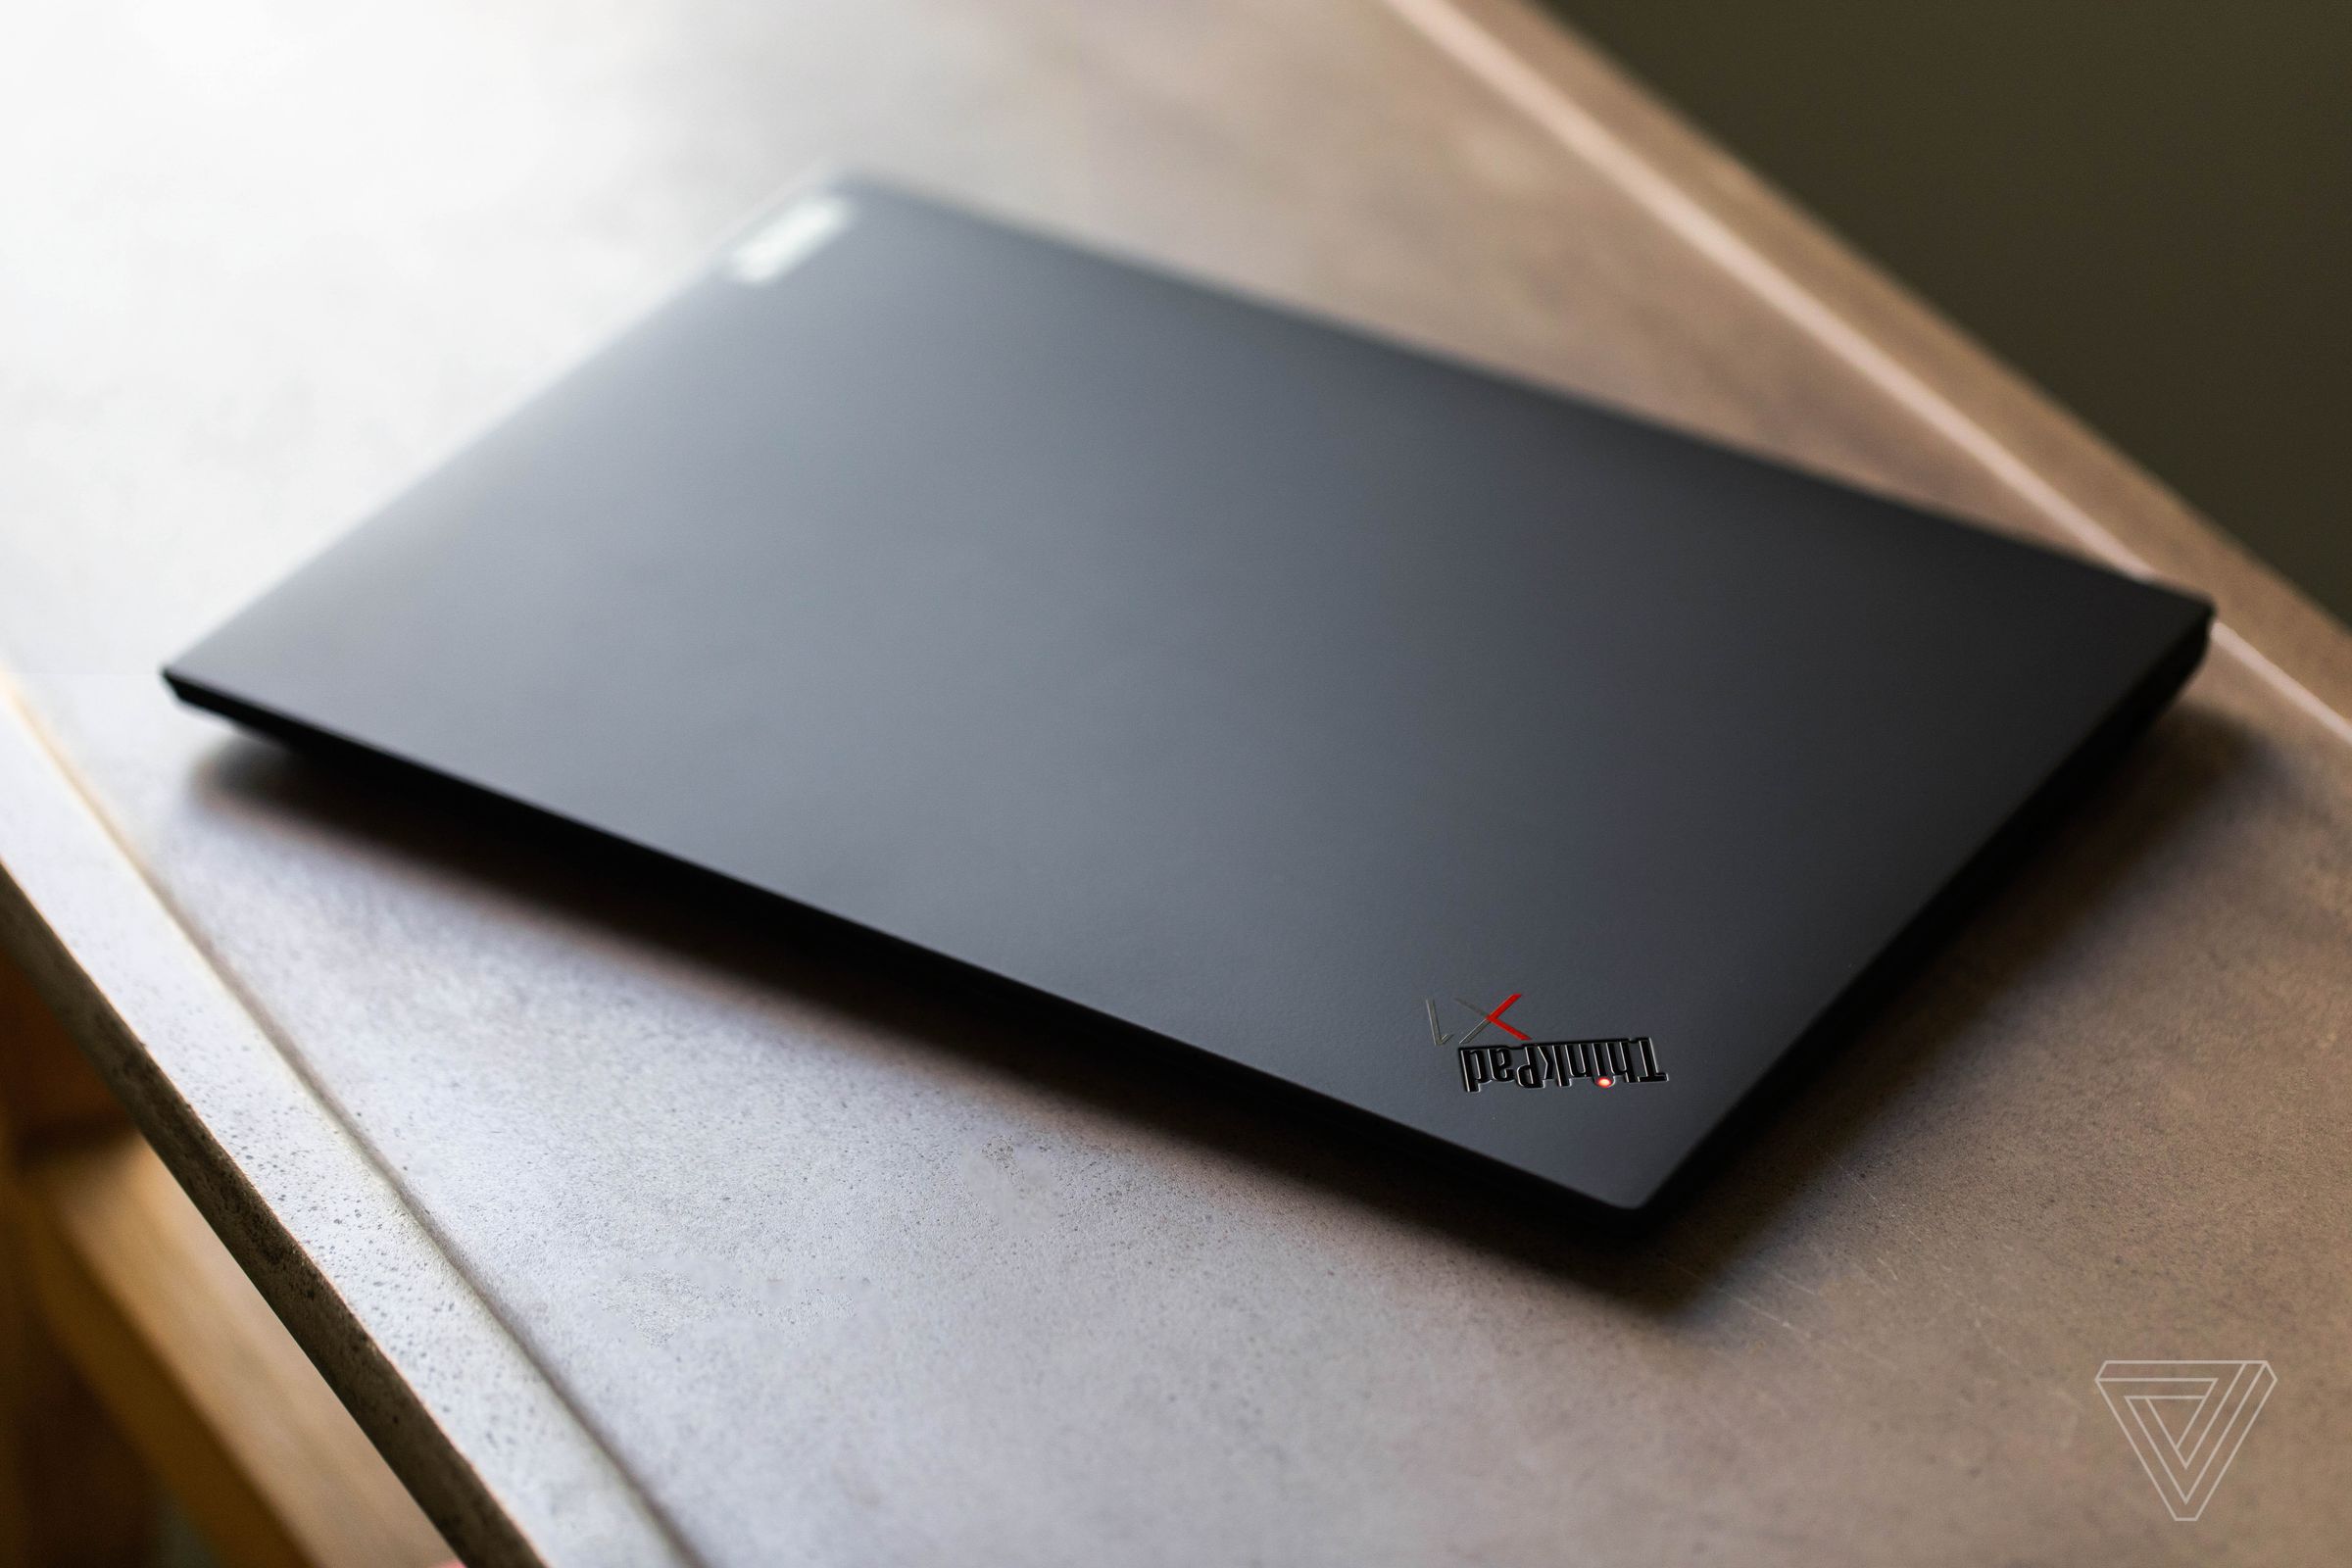 The ThinkPad X1 Carbon Gen 9 closed, seen from above.